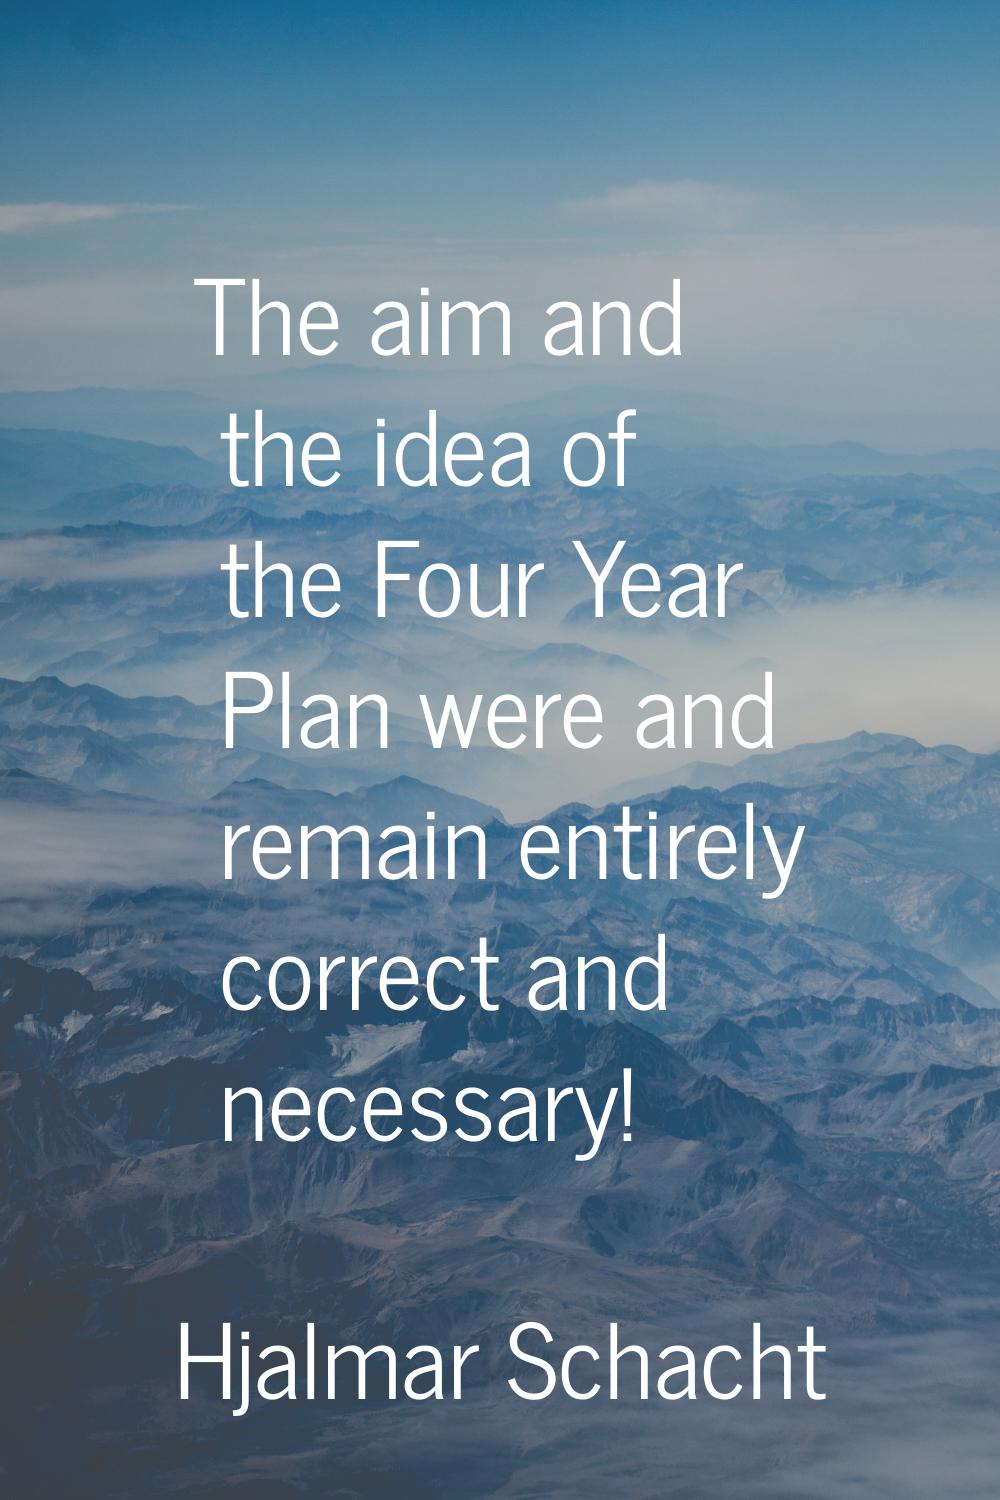 The aim and the idea of the Four Year Plan were and remain entirely correct and necessary!